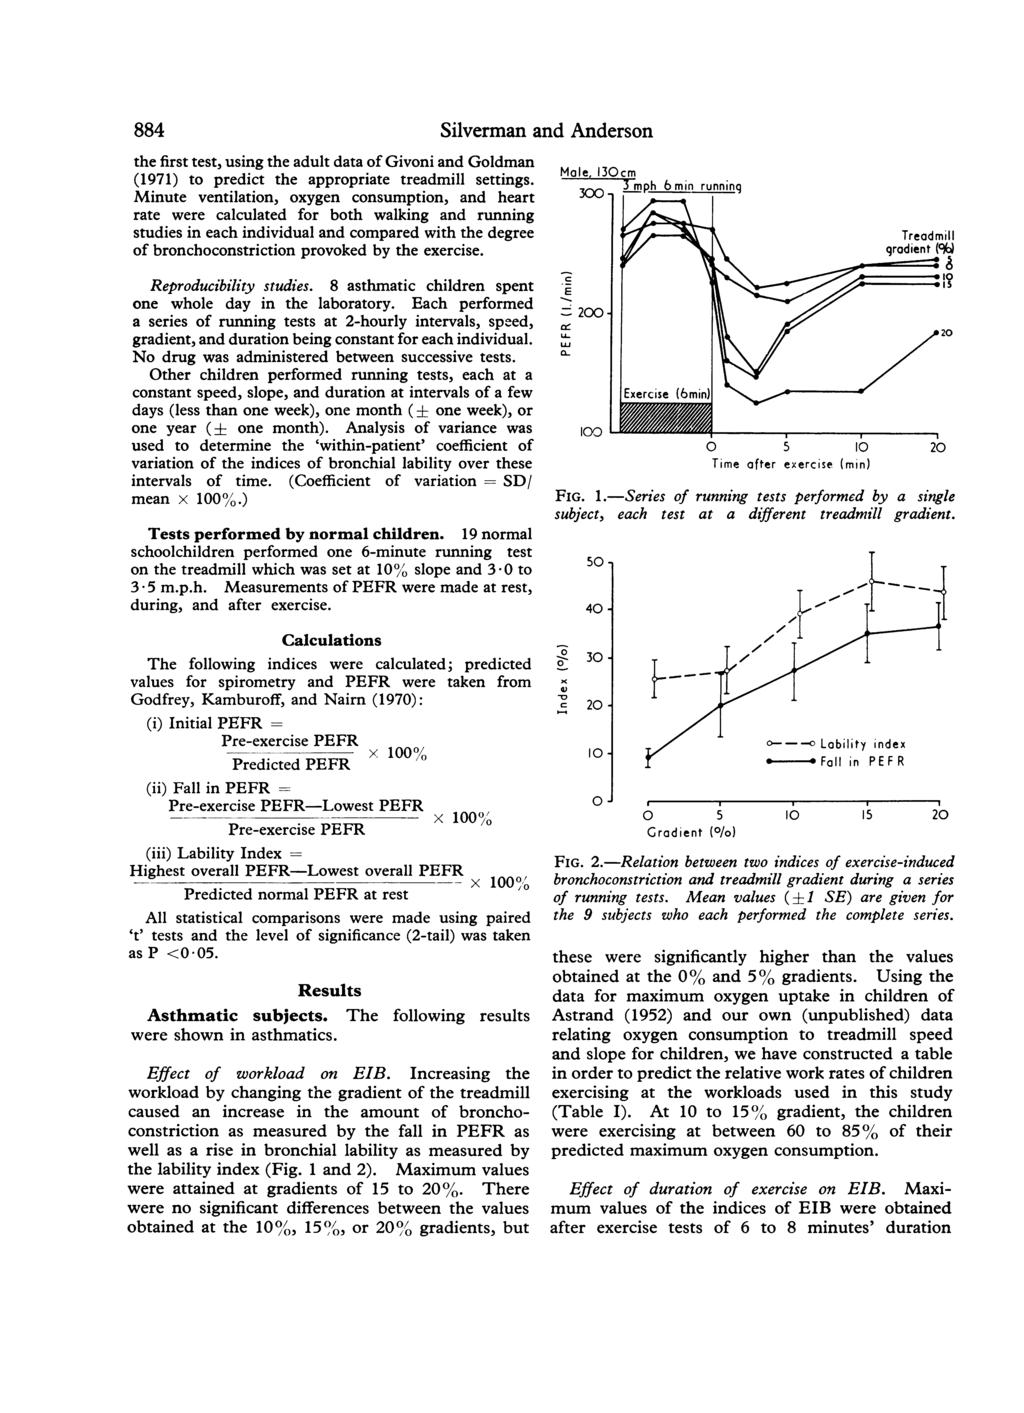 884 the first test, using the adult data of Givoni and Goldman (1971) to predict the appropriate treadmill settings.